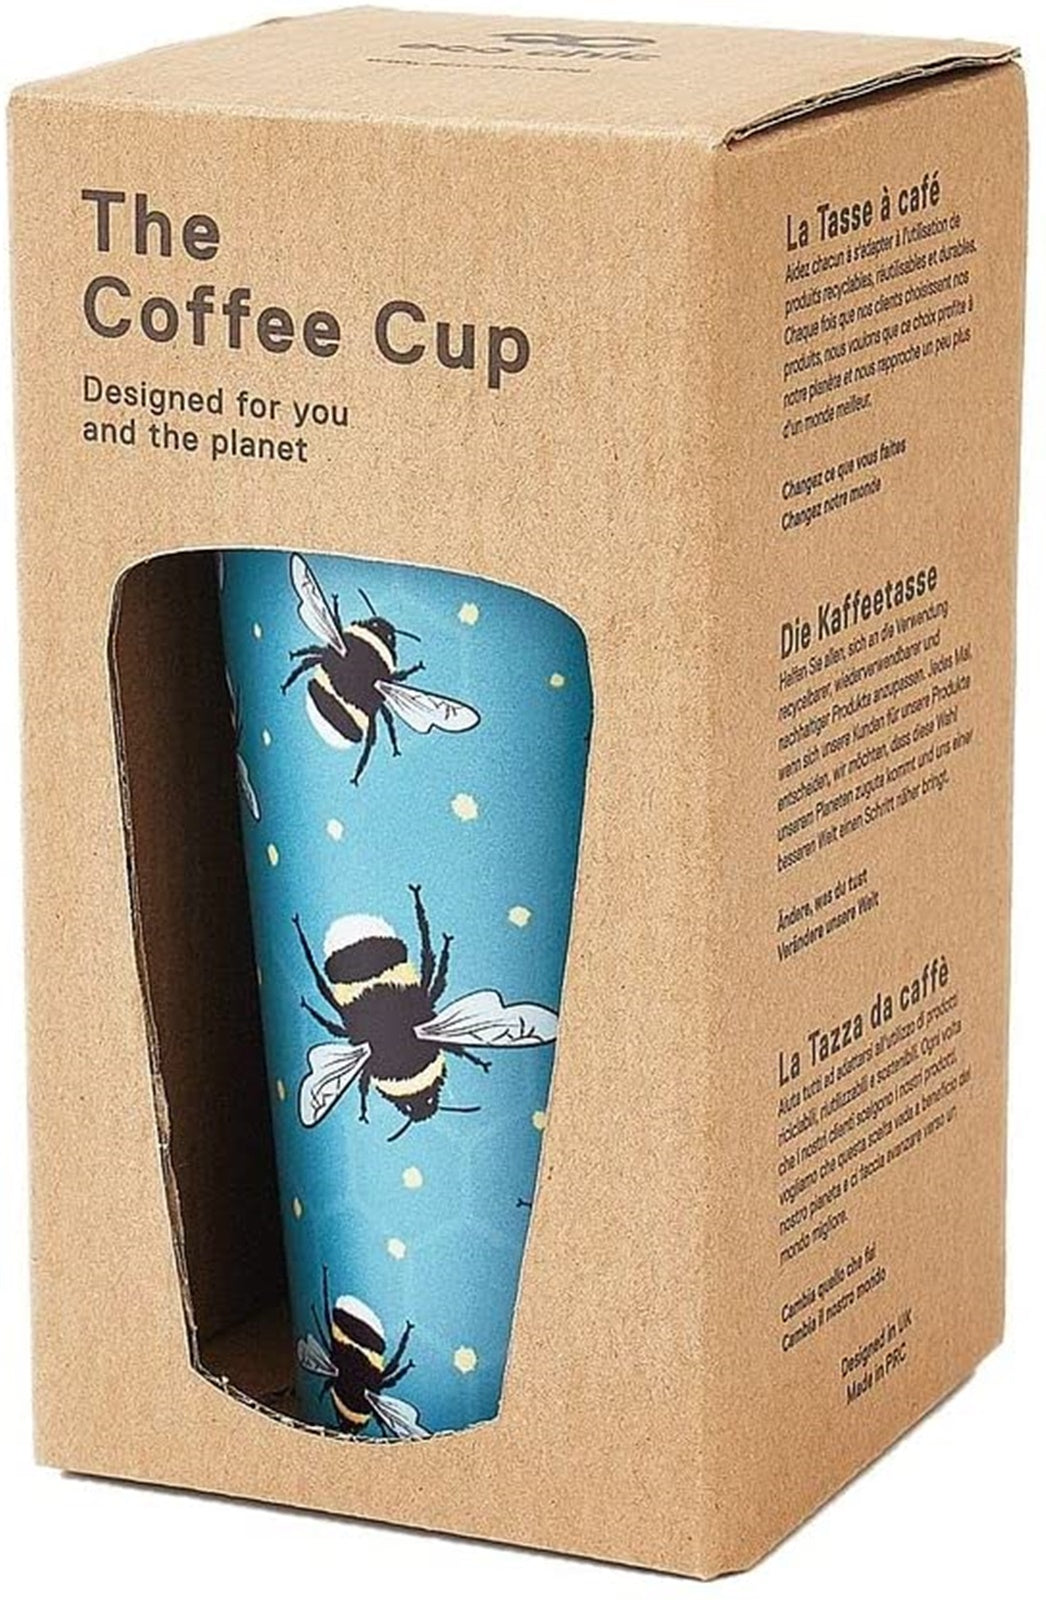 Eco Chic Reusable Thermal Coffee Cup | Stainless Steel Insulated Travel Mug with Leakproof Lid | Eco-Friendly and Reusable for Hot & Cold Drinks (Blue Bee, 380ml/13oz)